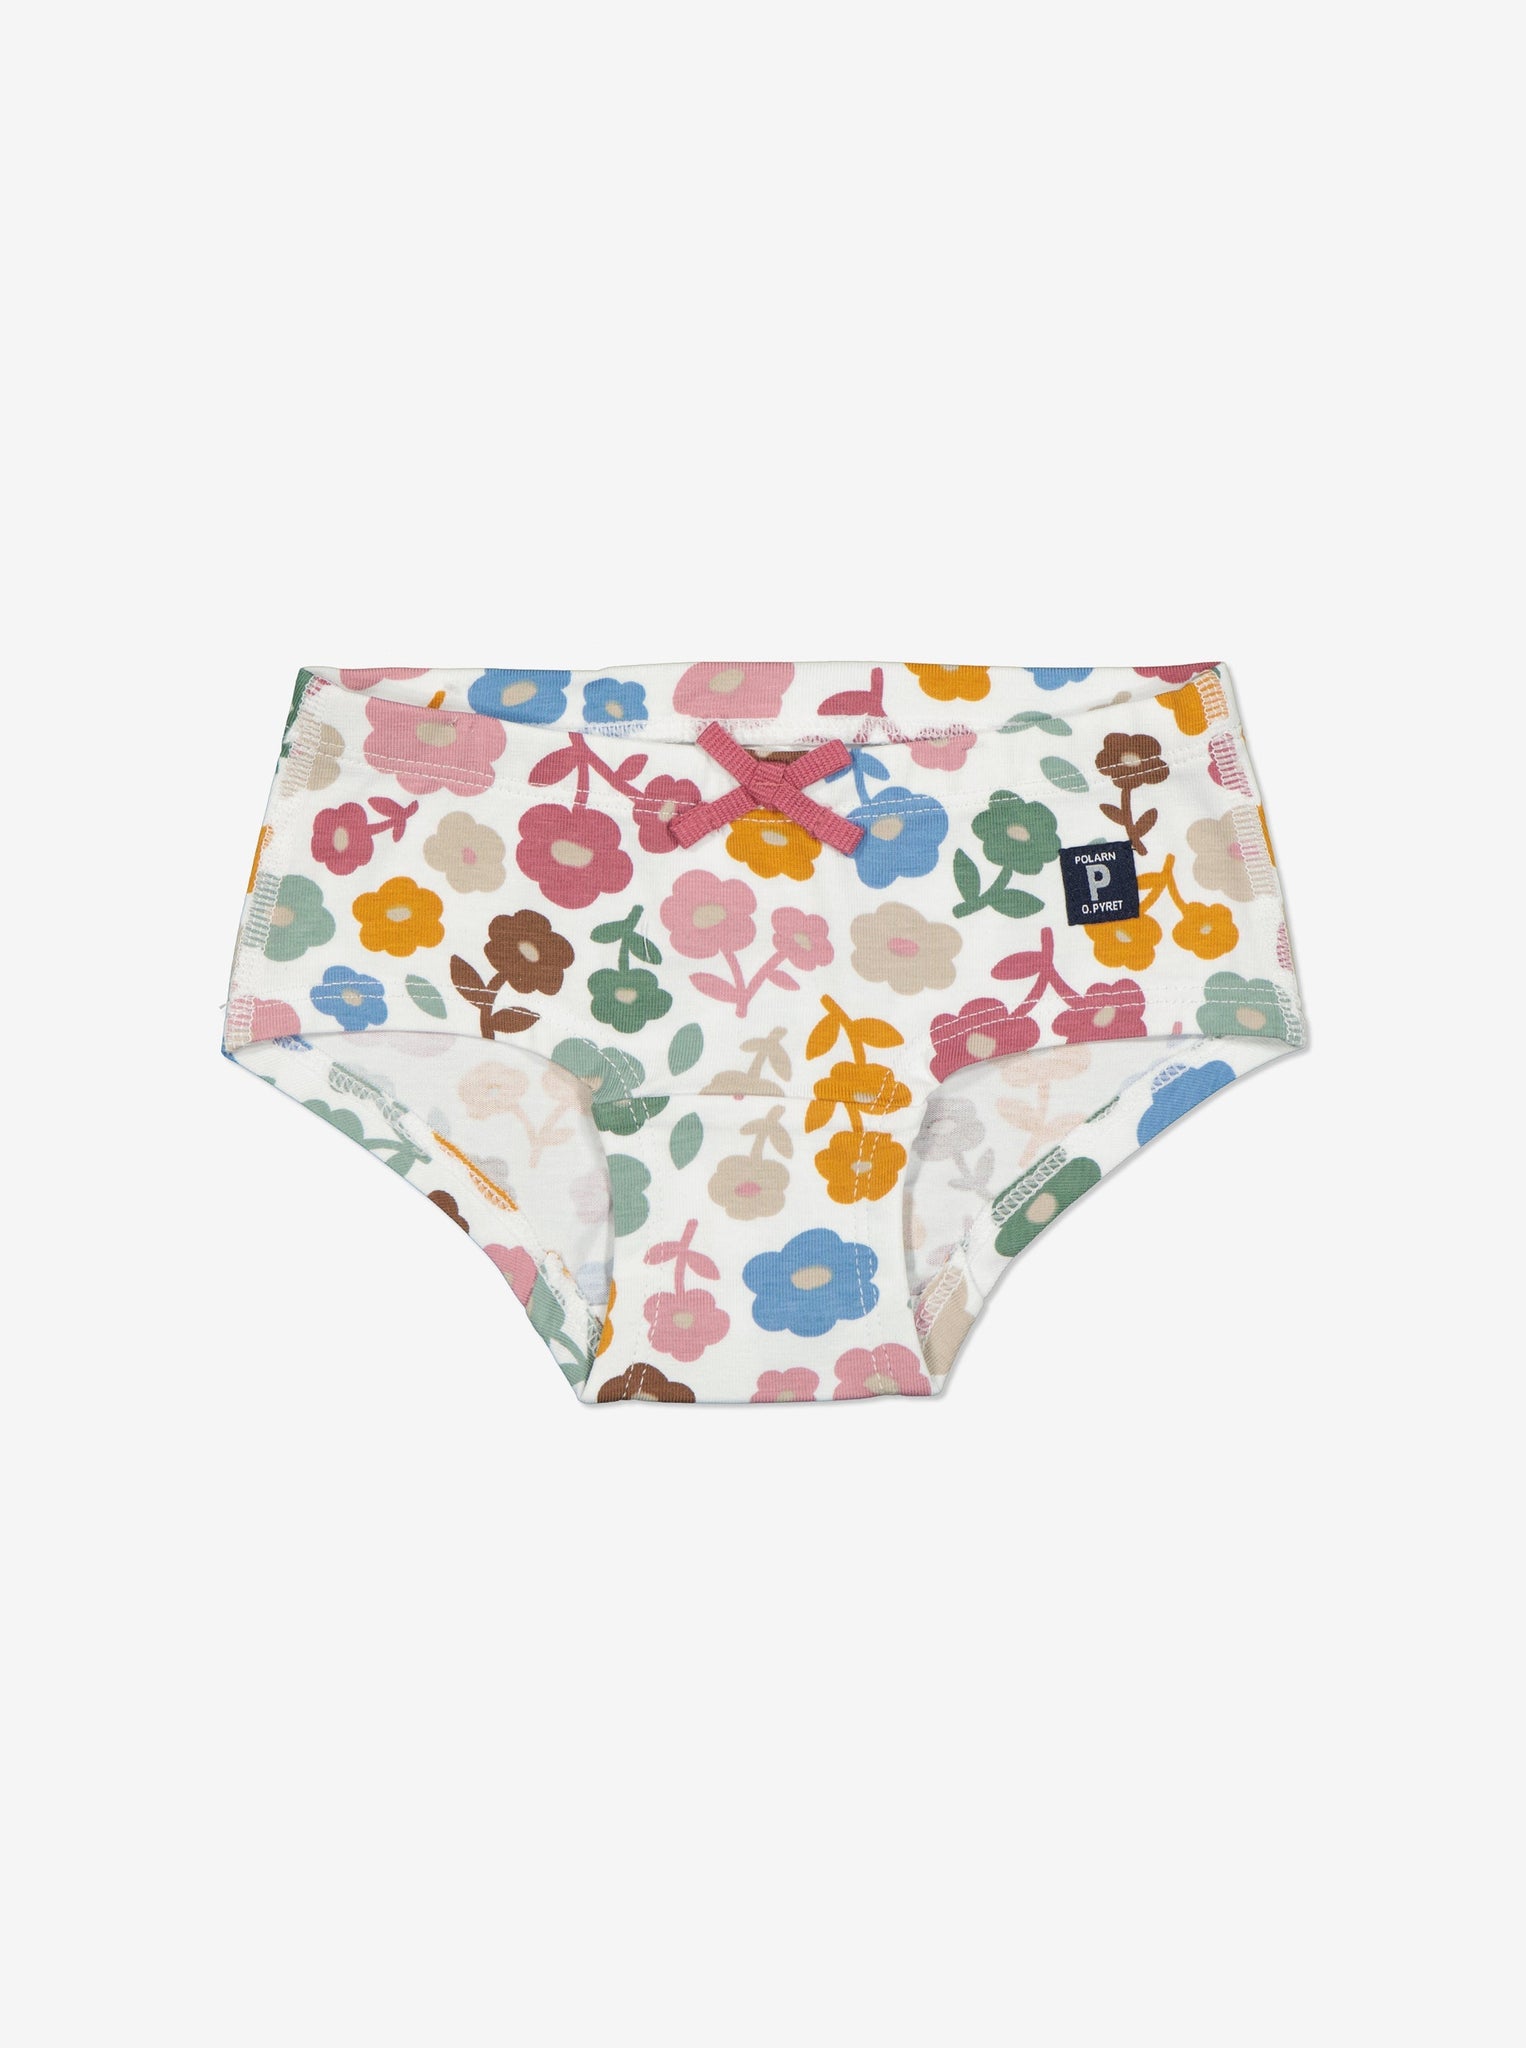 Organic Cotton Floral White Briefs from the Polarn O. Pyret Kidswear collection. Ethically produced kids clothing.